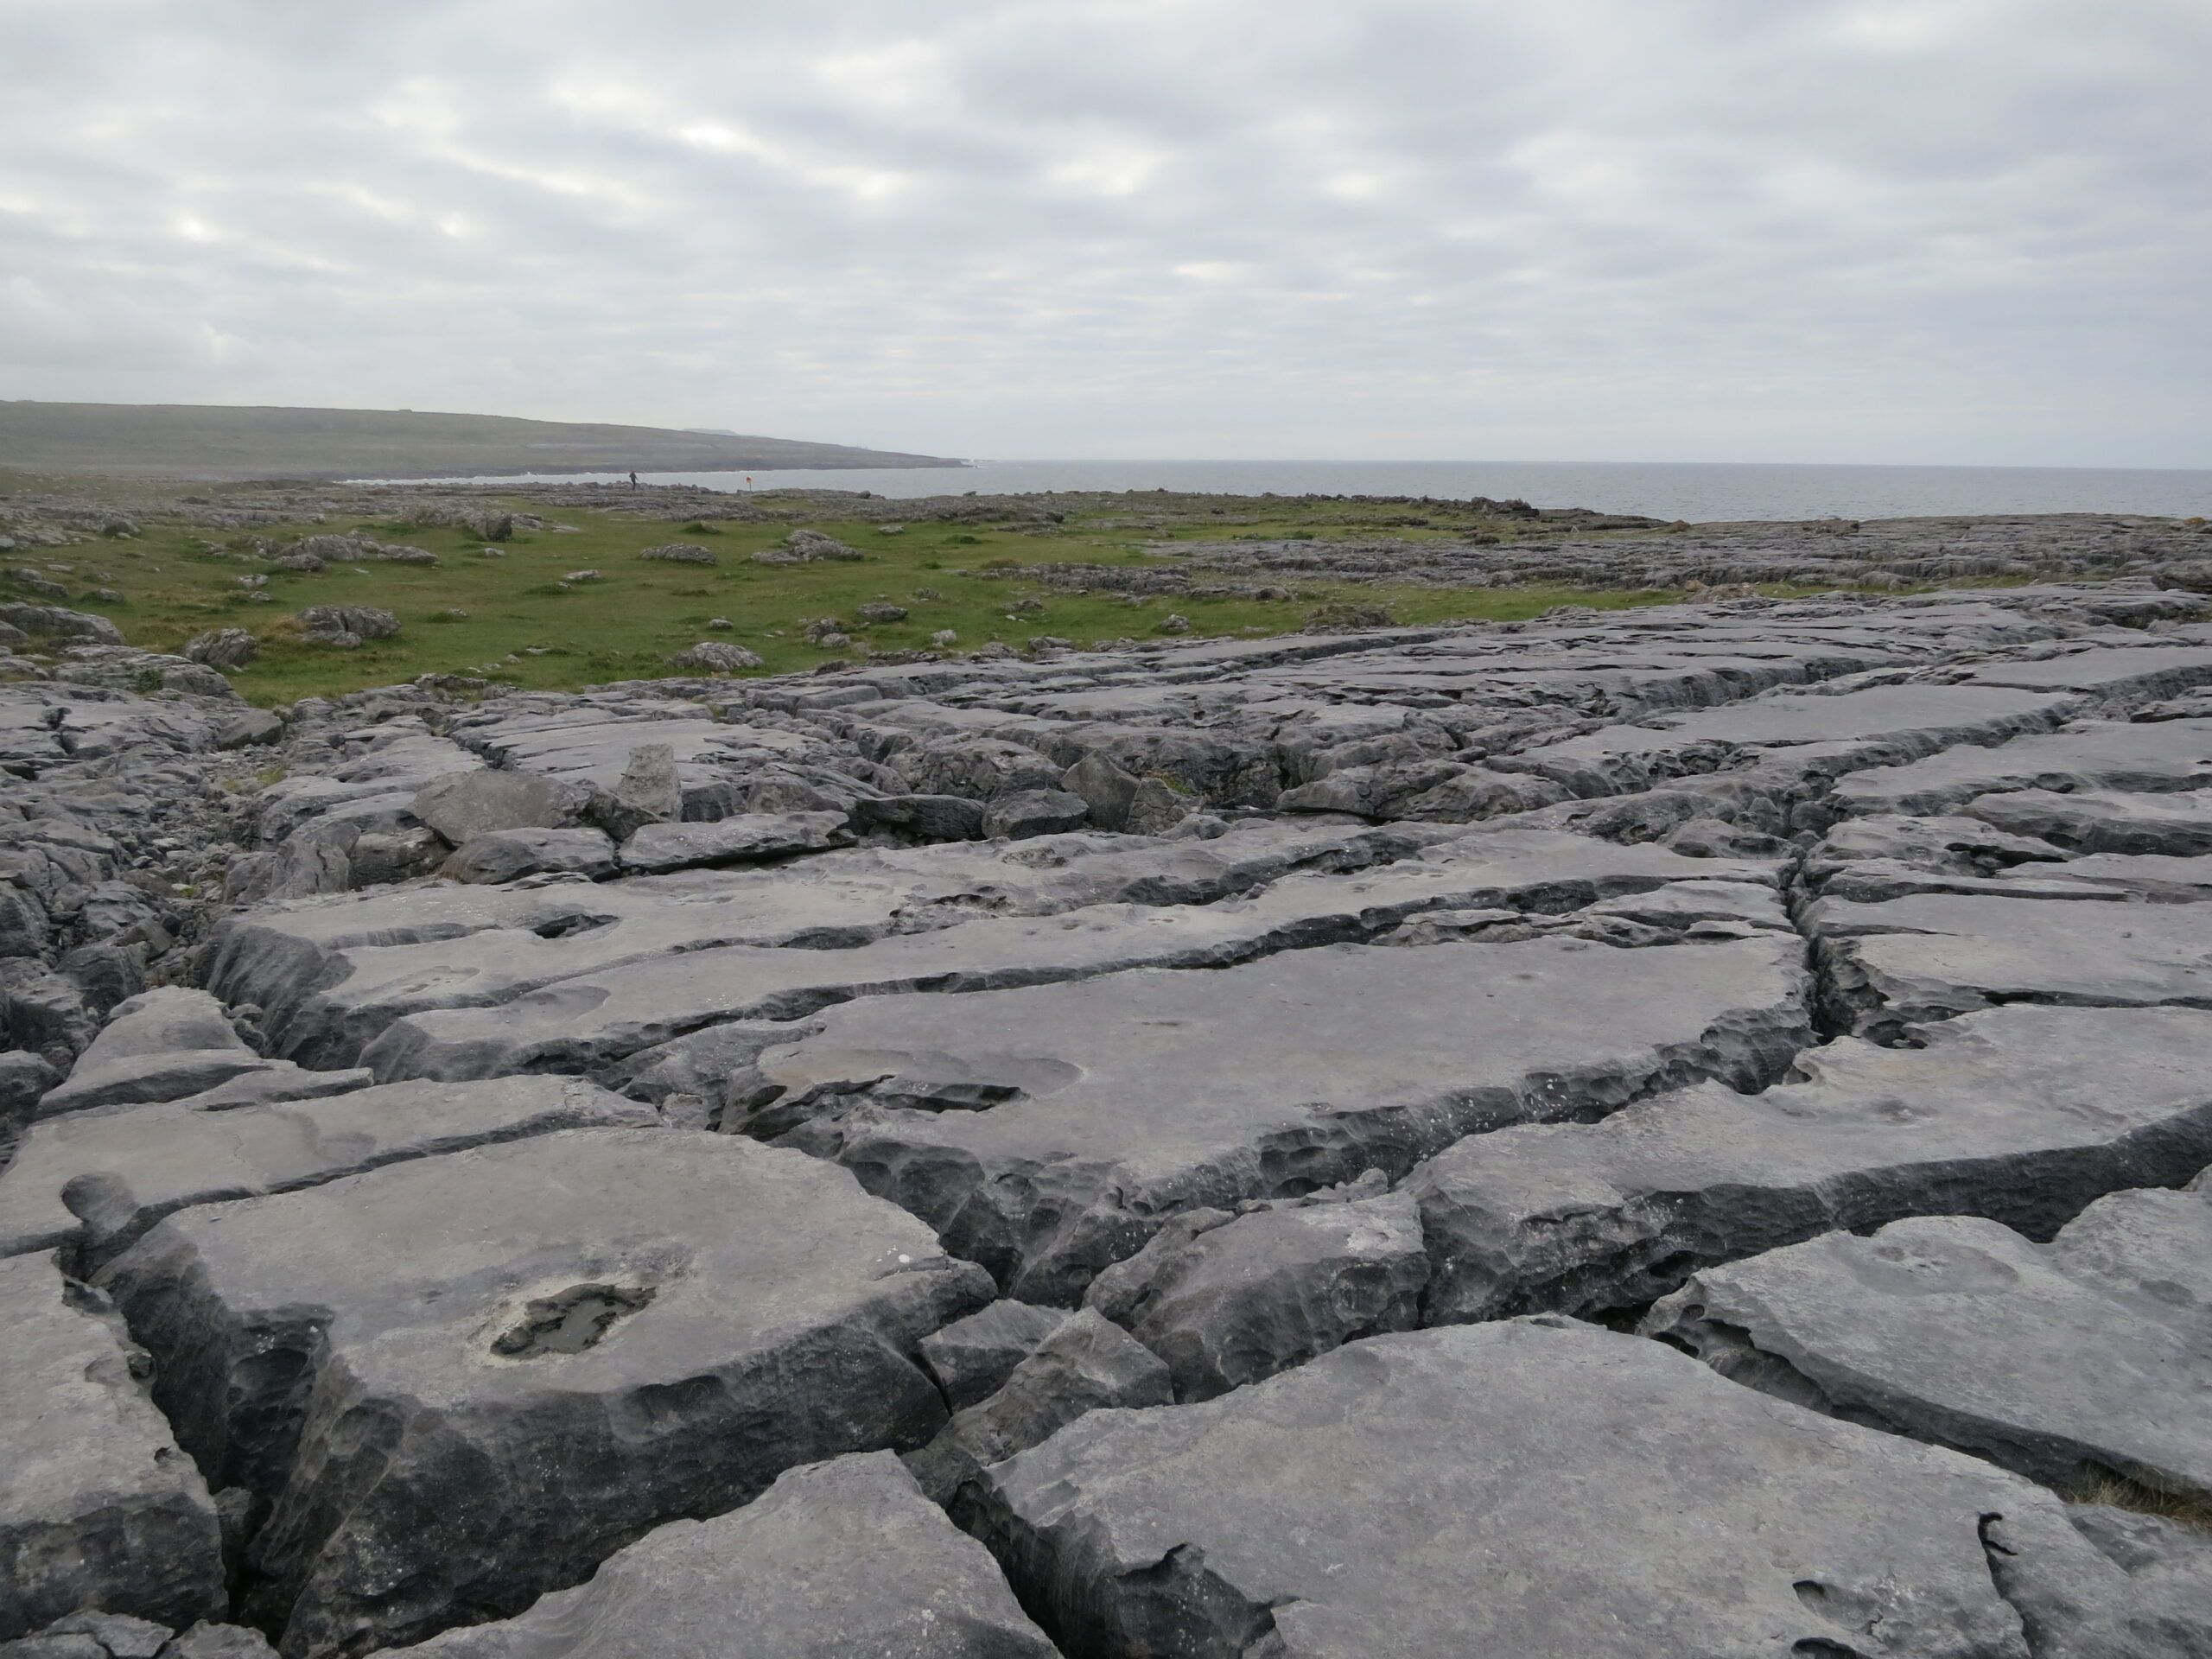 The Burren, never-ending rock formations in County Clare, Ireland.